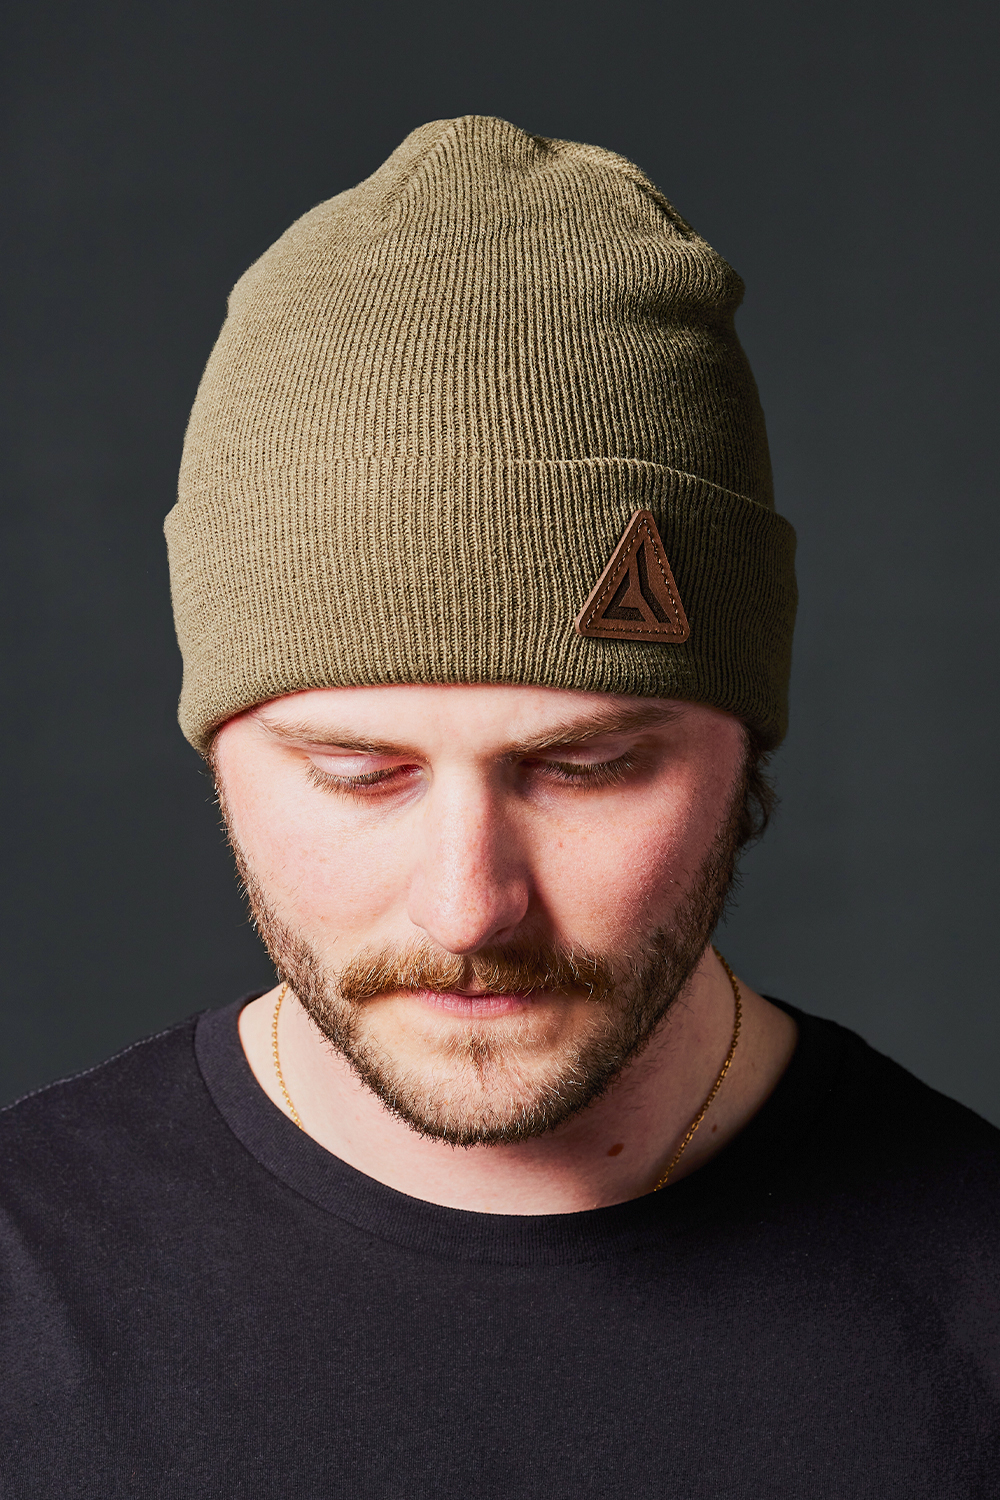 Green beanie, triangle logo leather patch (Richardson style #18)